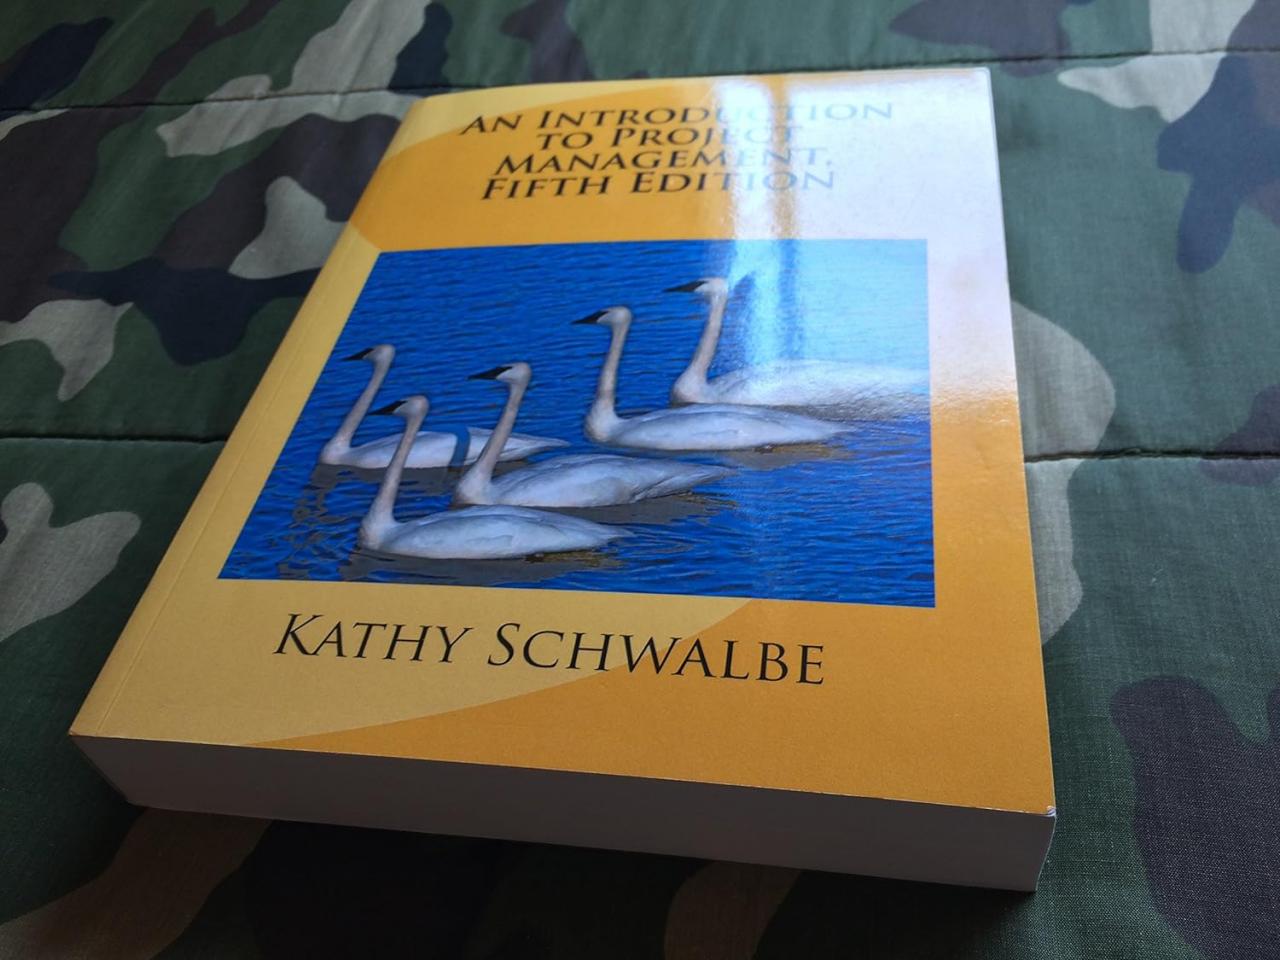 An introduction to project management fifth edition kathy schwalbe